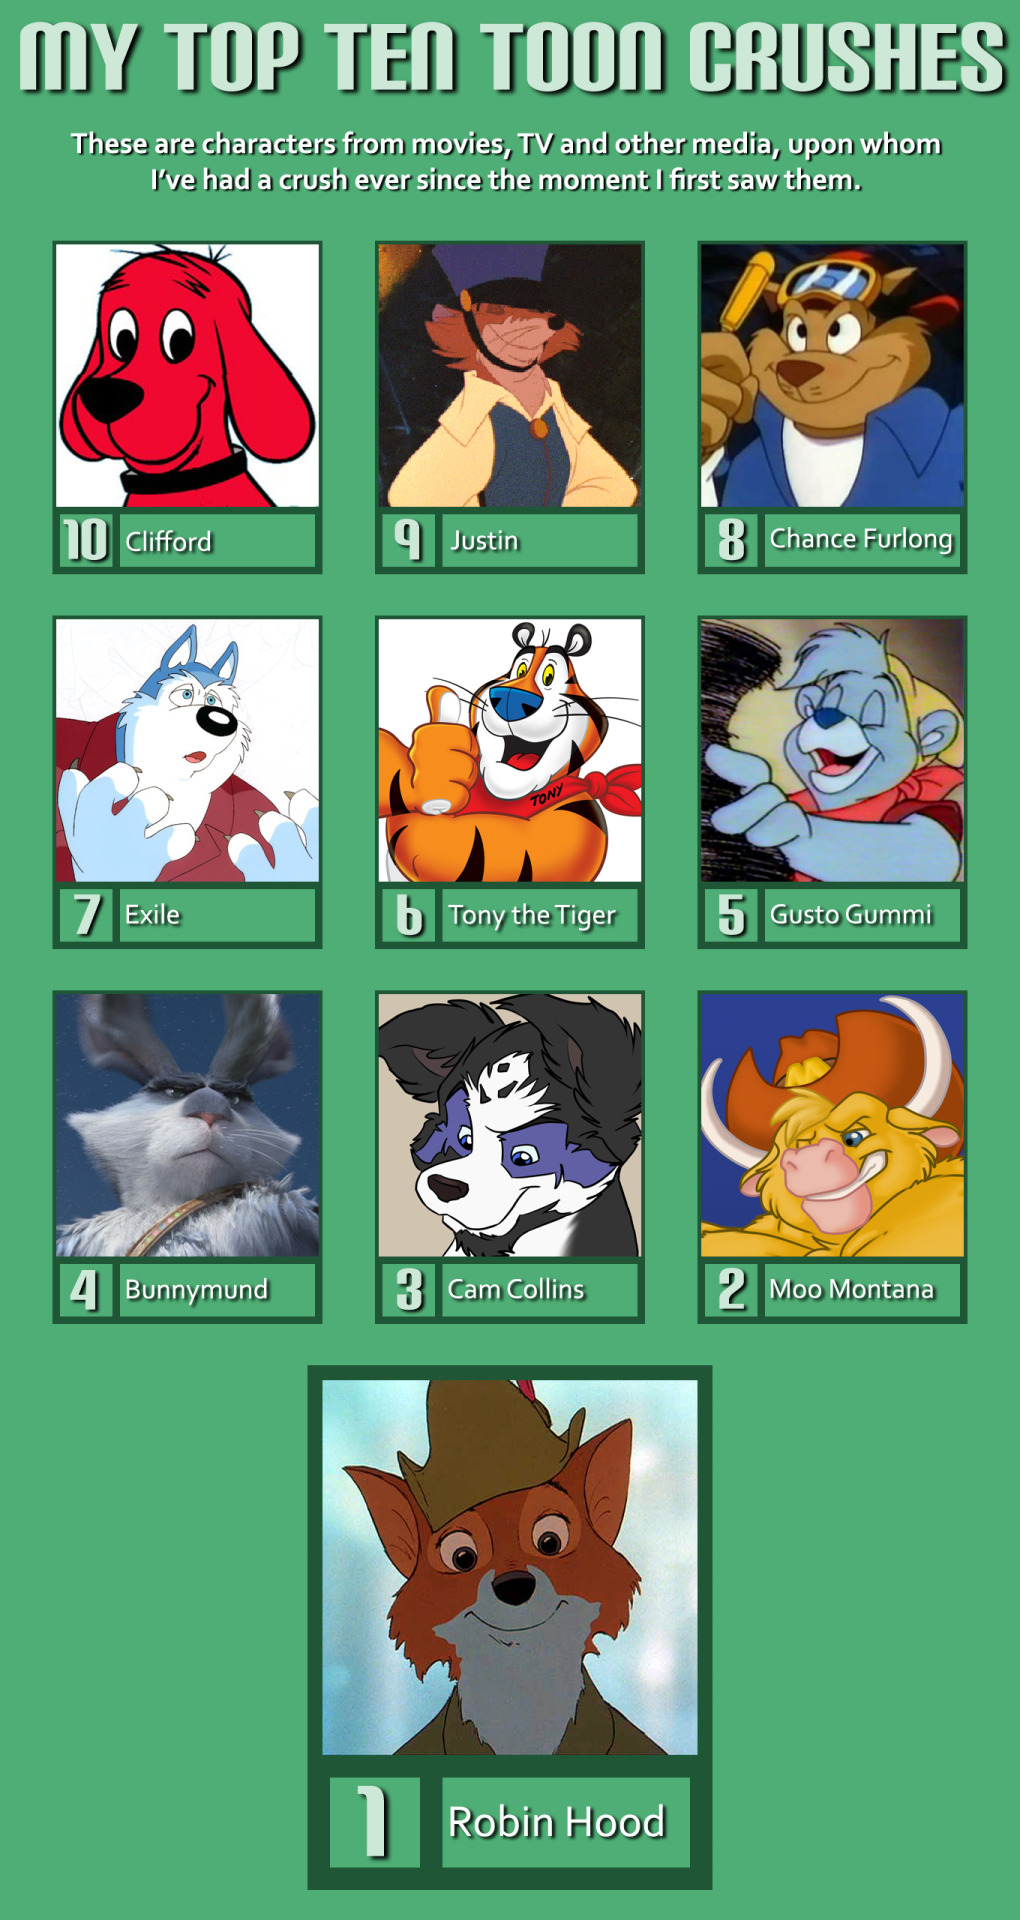 My Top Ten Toon Crushes! I posted something like this about a year ago, and since